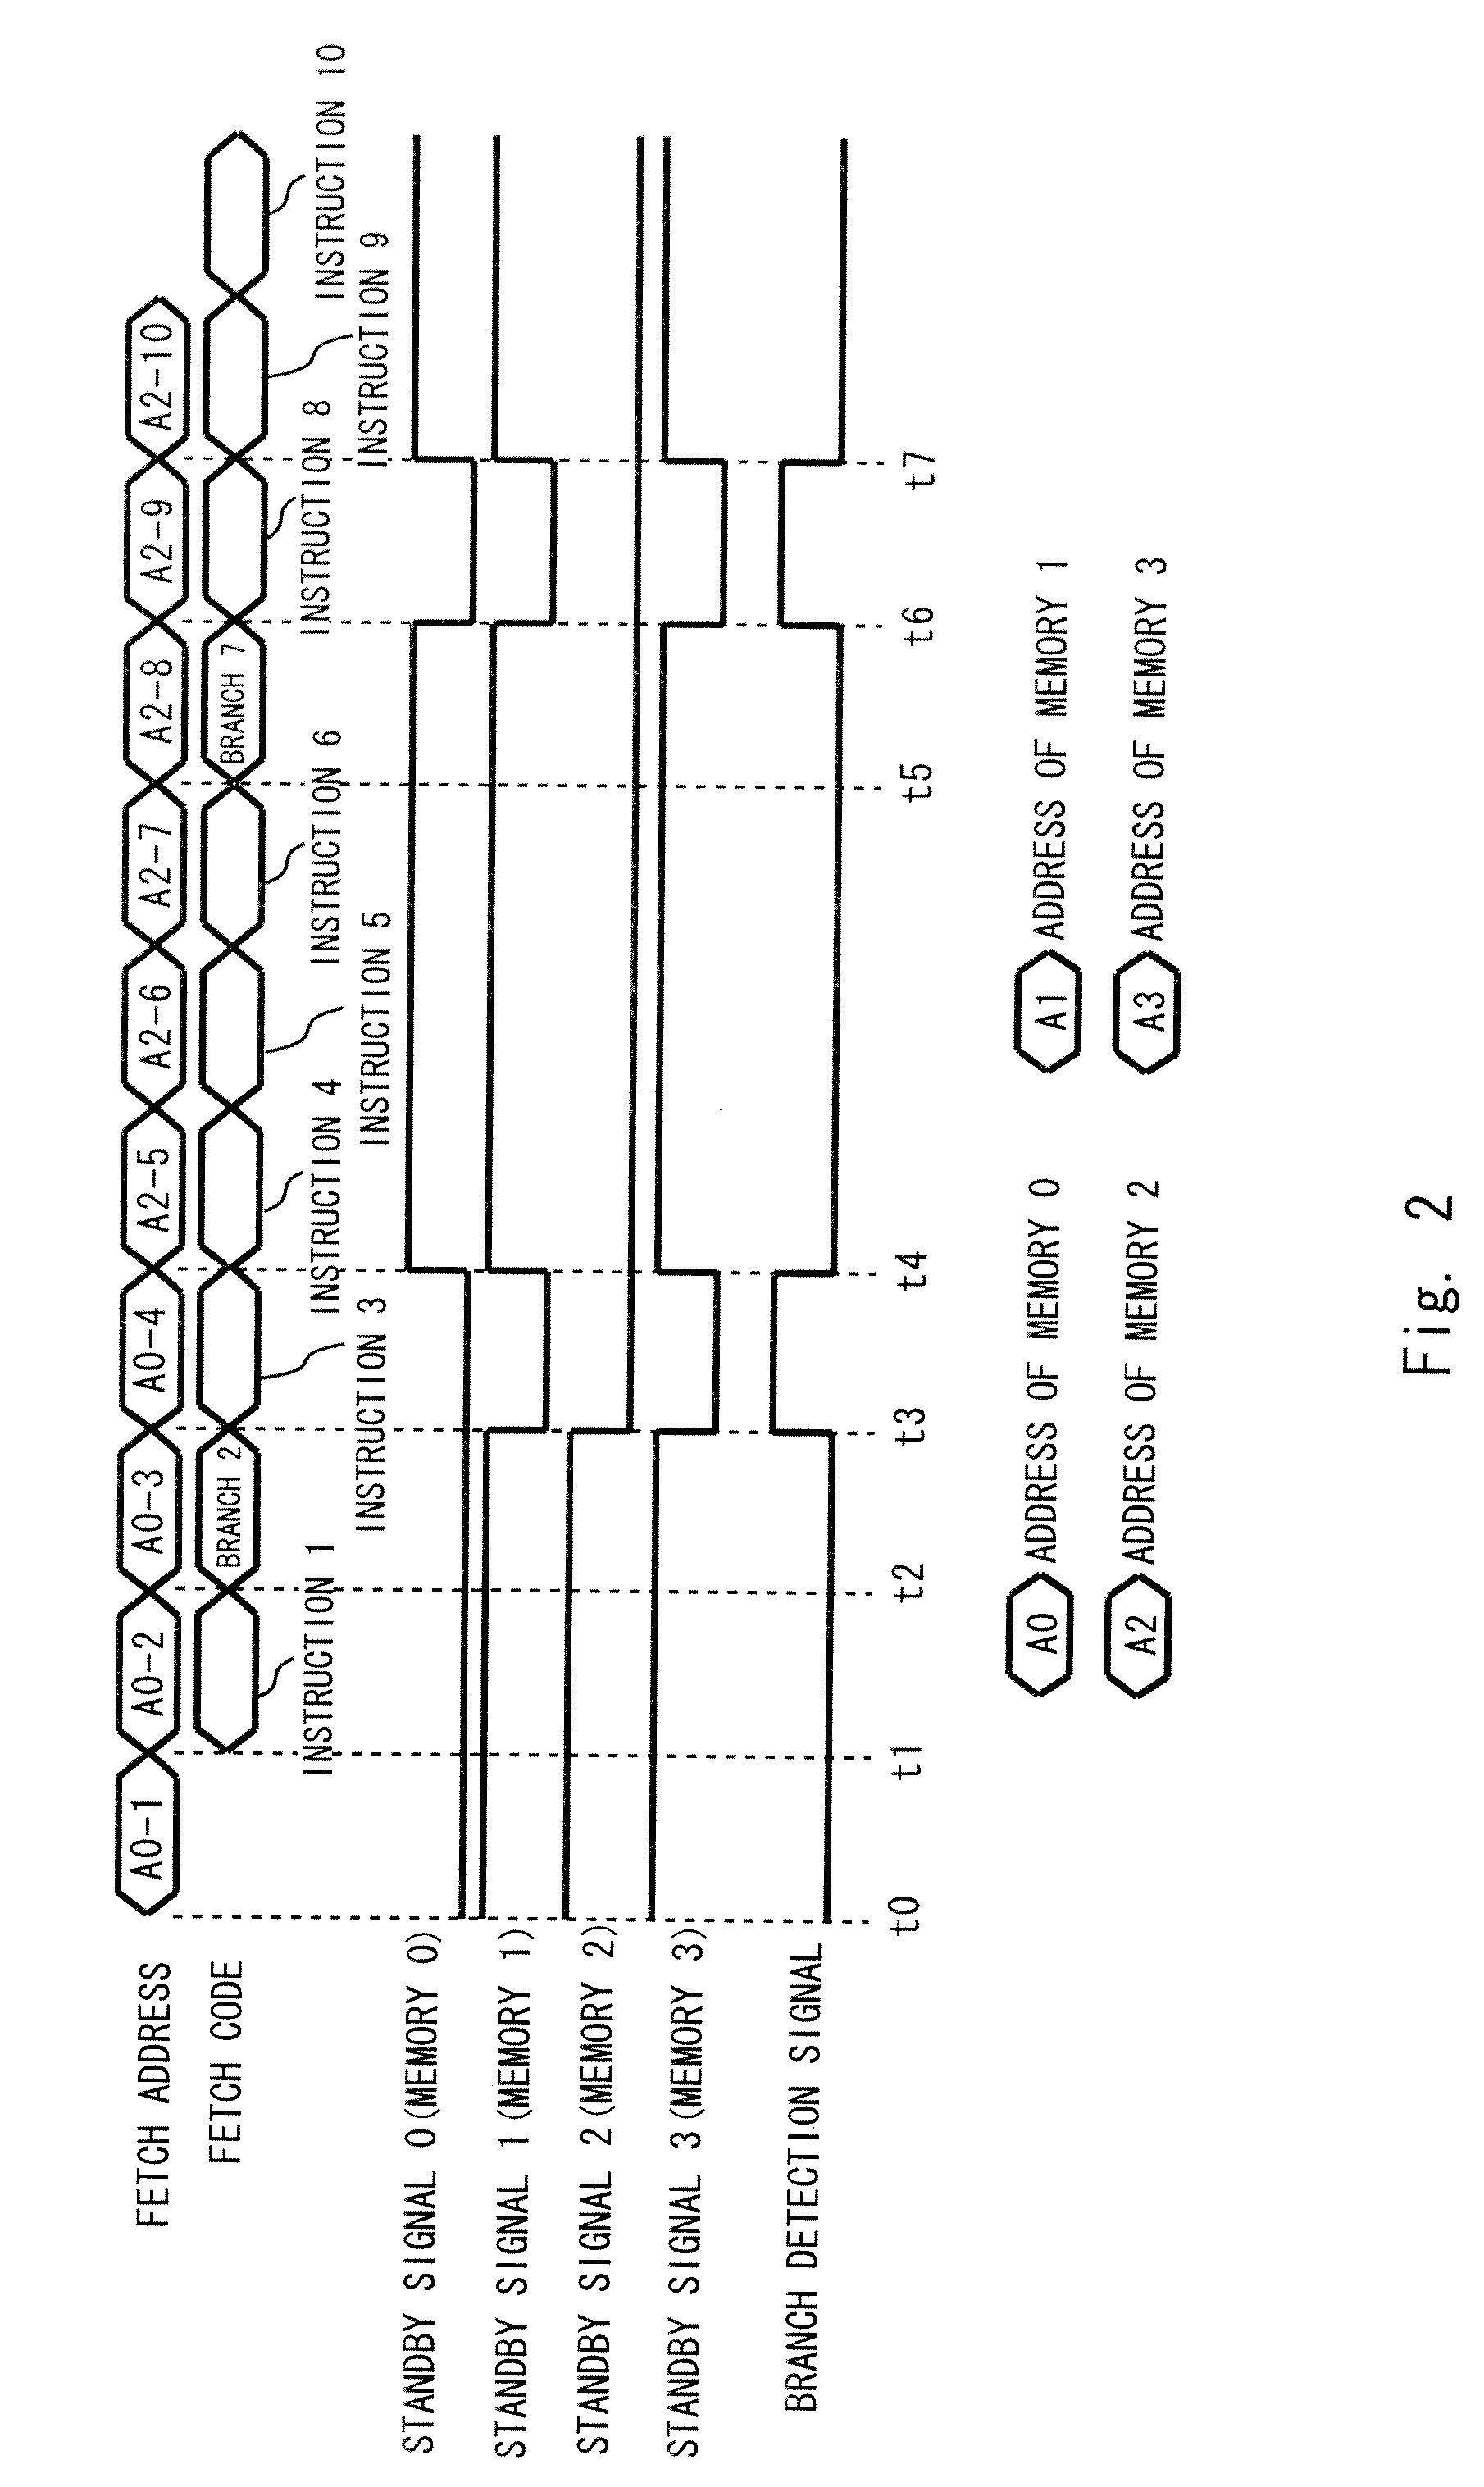 Memory control circuit and integrated circuit including branch instruction and detection and operation mode control of a memory